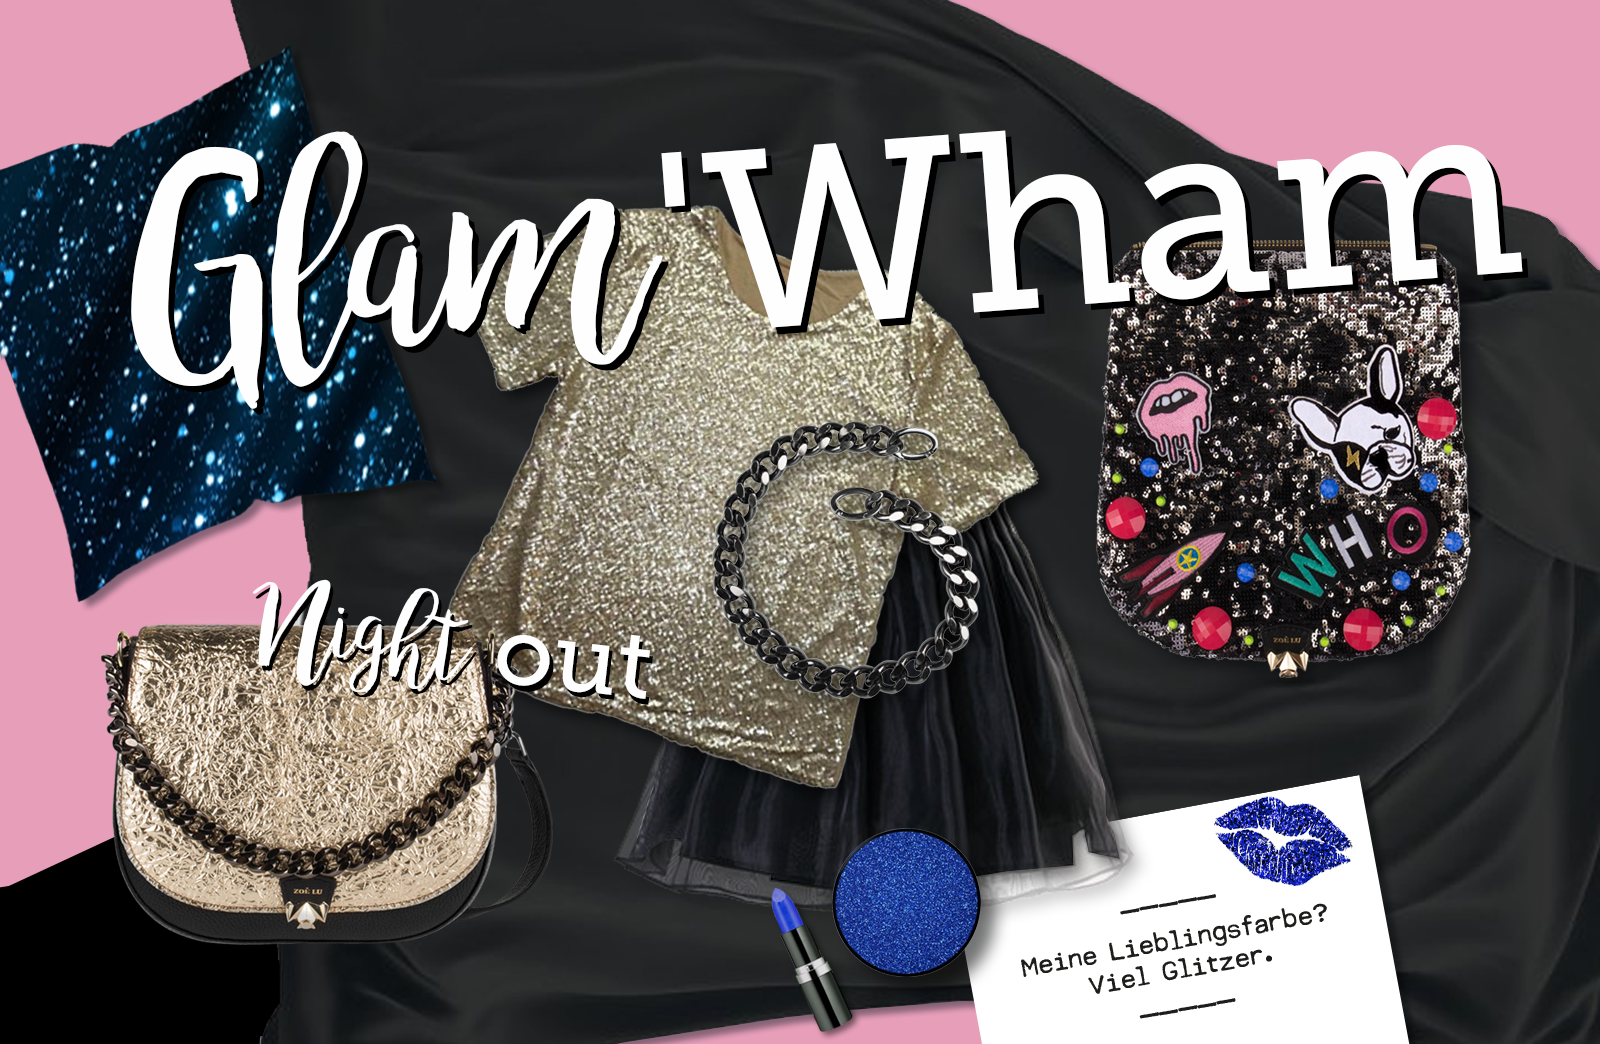 Wechselklappen Glam'Wham und Night out, Xmas, Glamour, Sylvester-Party, ZOÉ LU